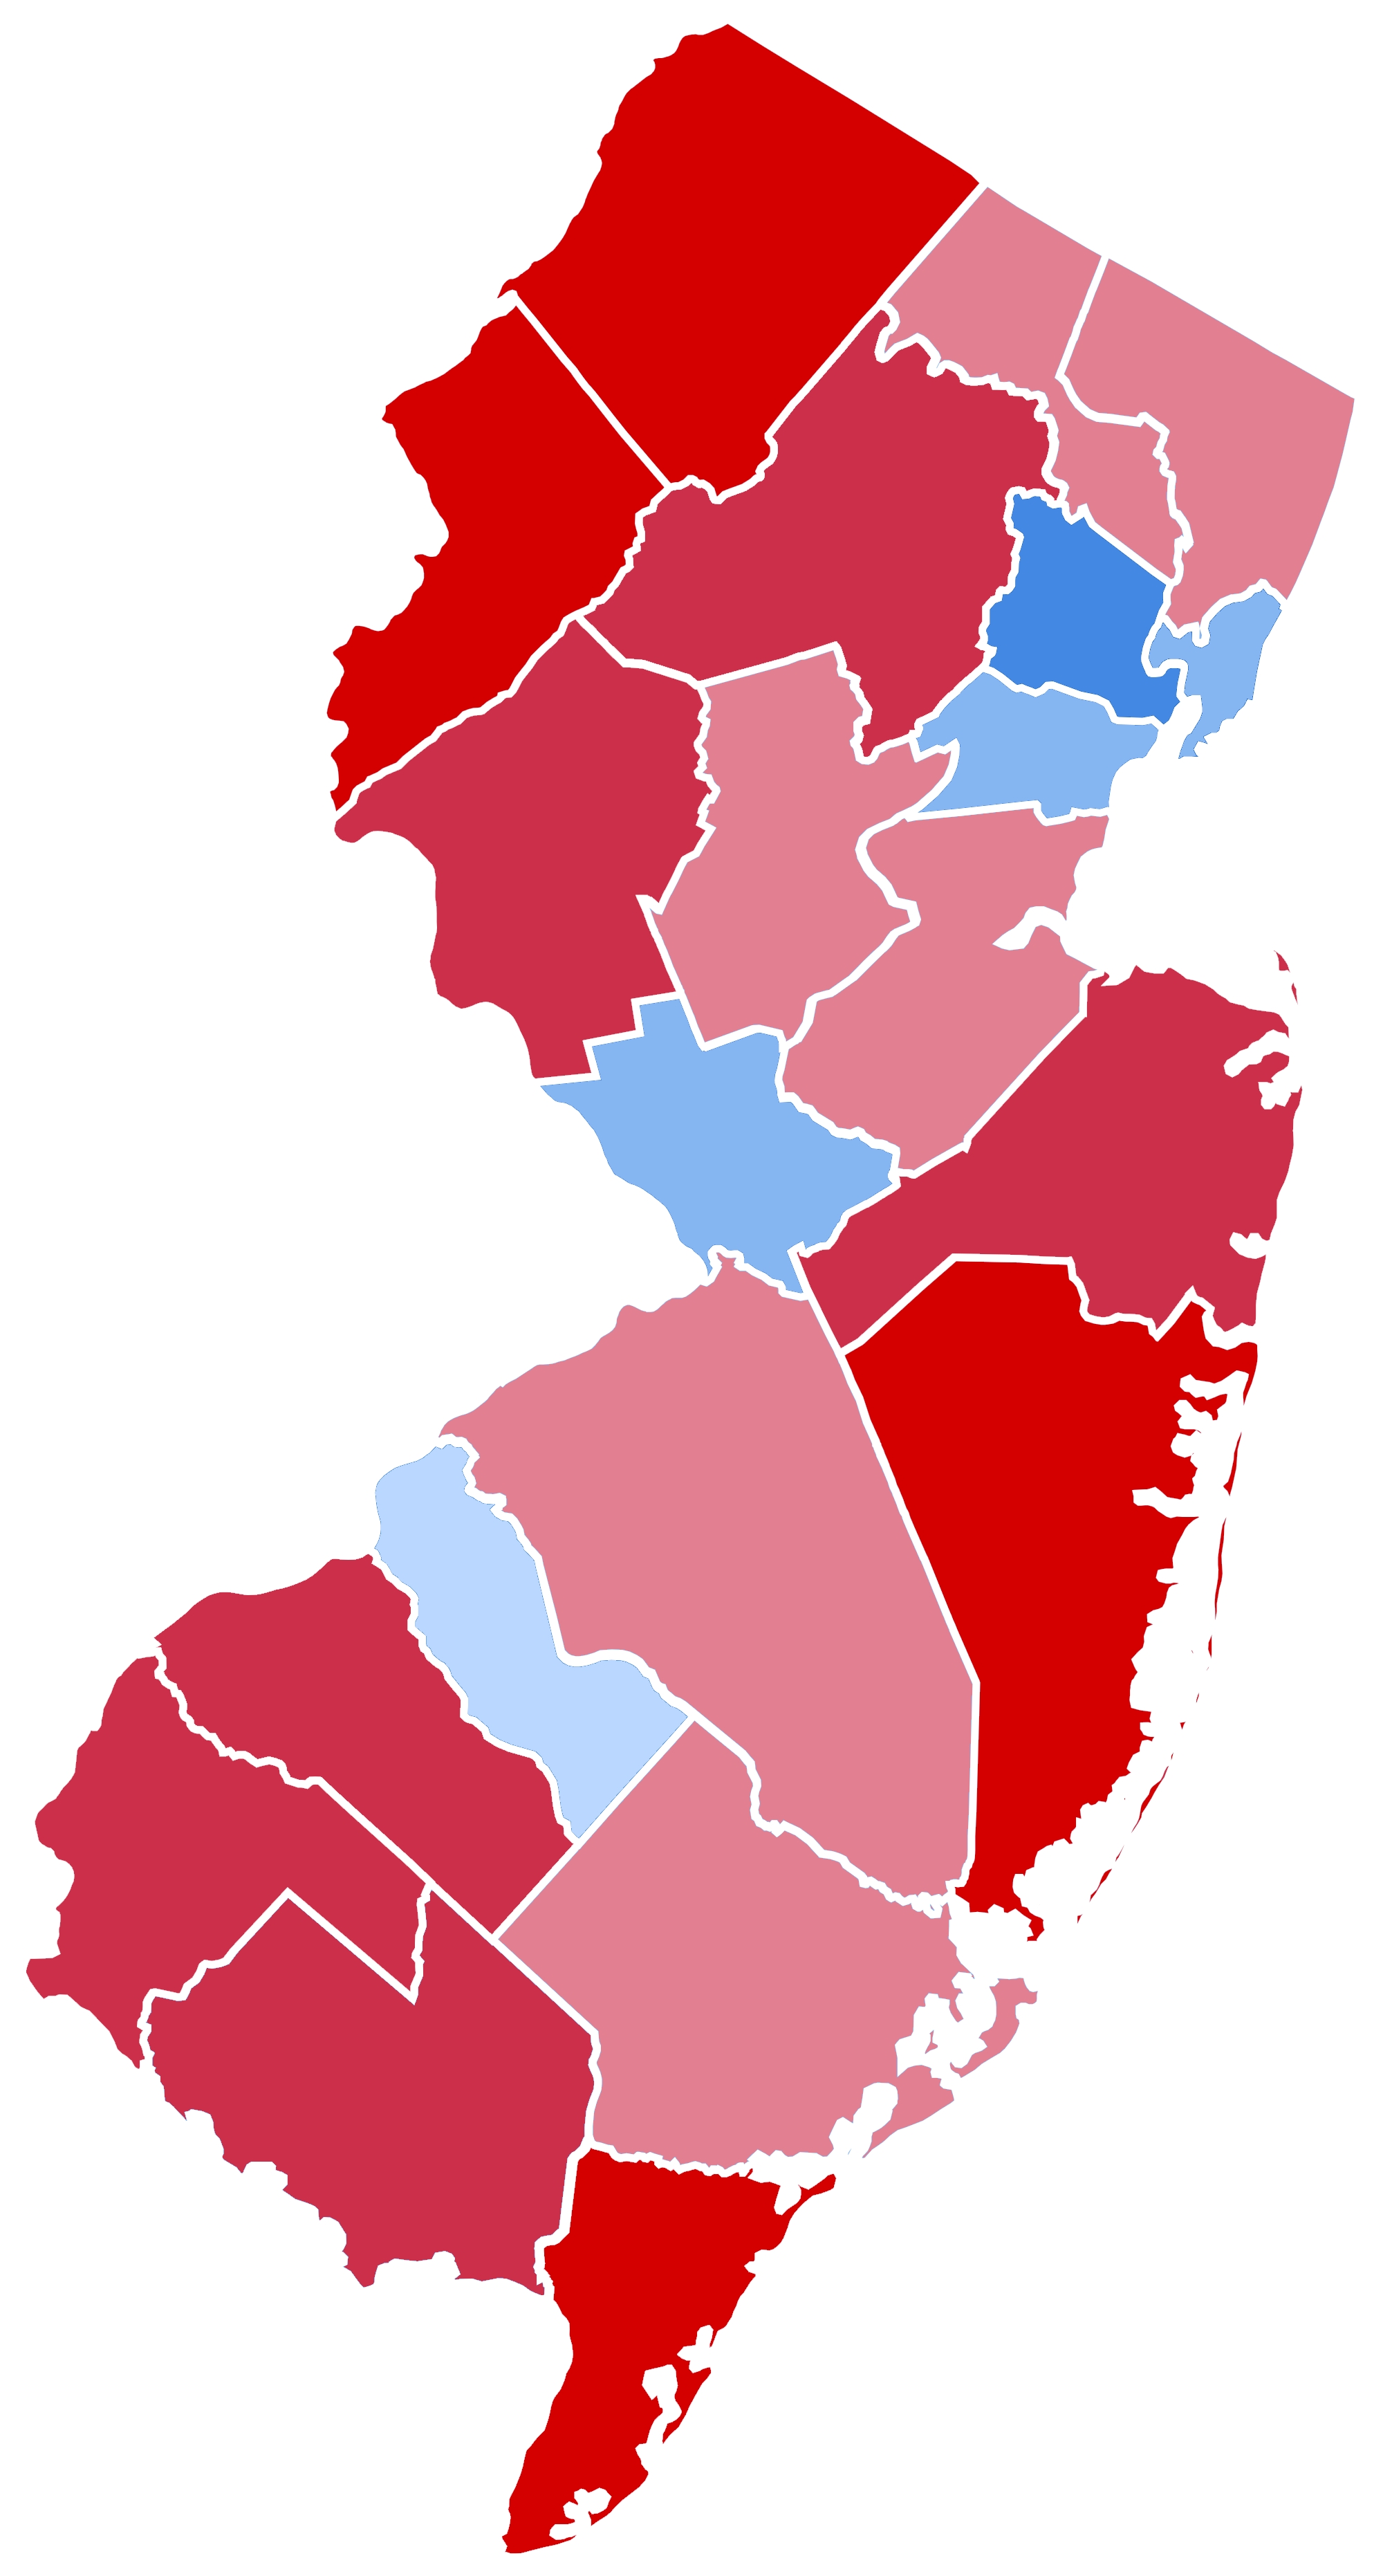 2000px-New_Jersey_Presidential_Election_Results_2016_Republican_Landslide_15.06%.png